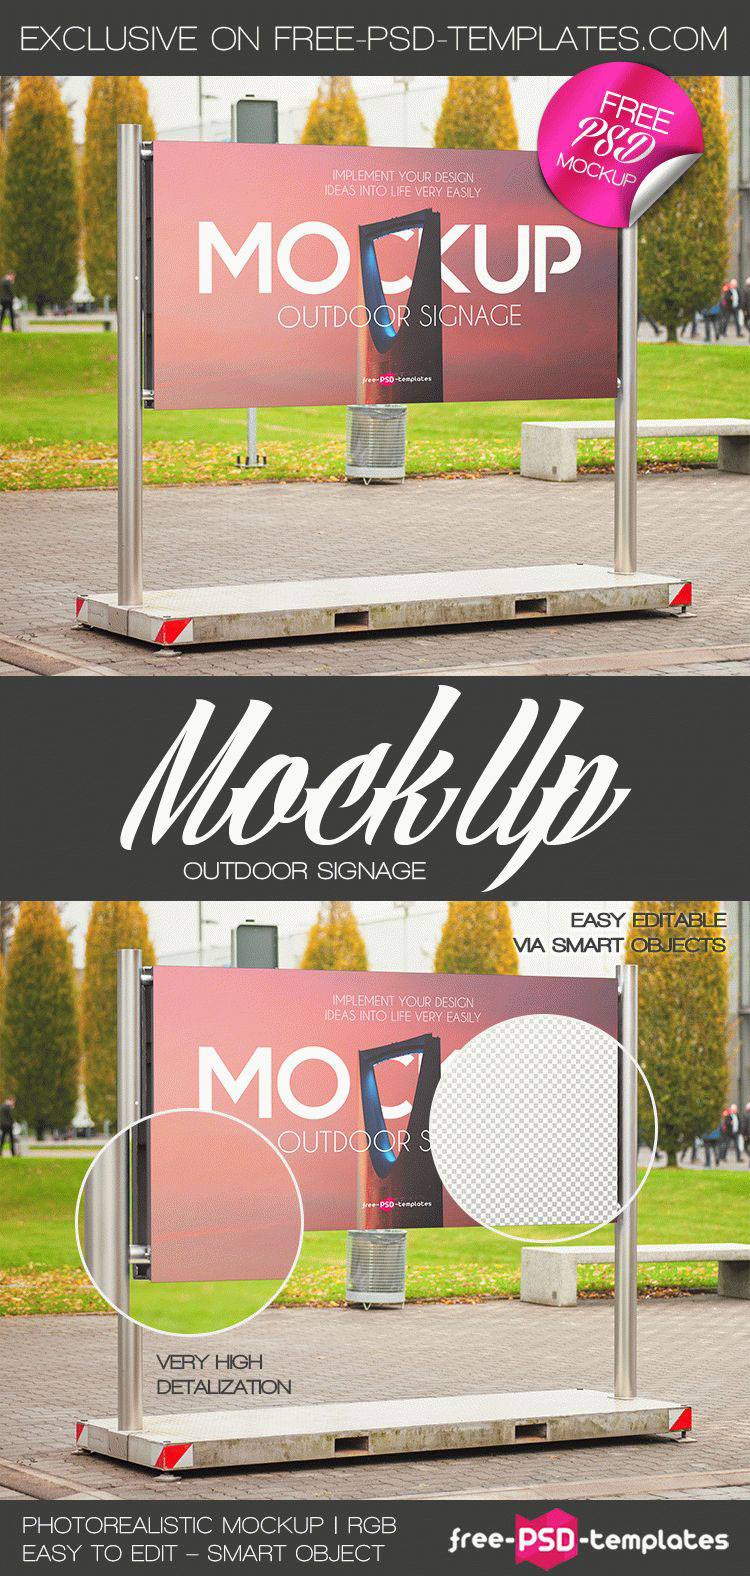 Mockup free product mockups Outdoor Signage banner advertisement ad Street